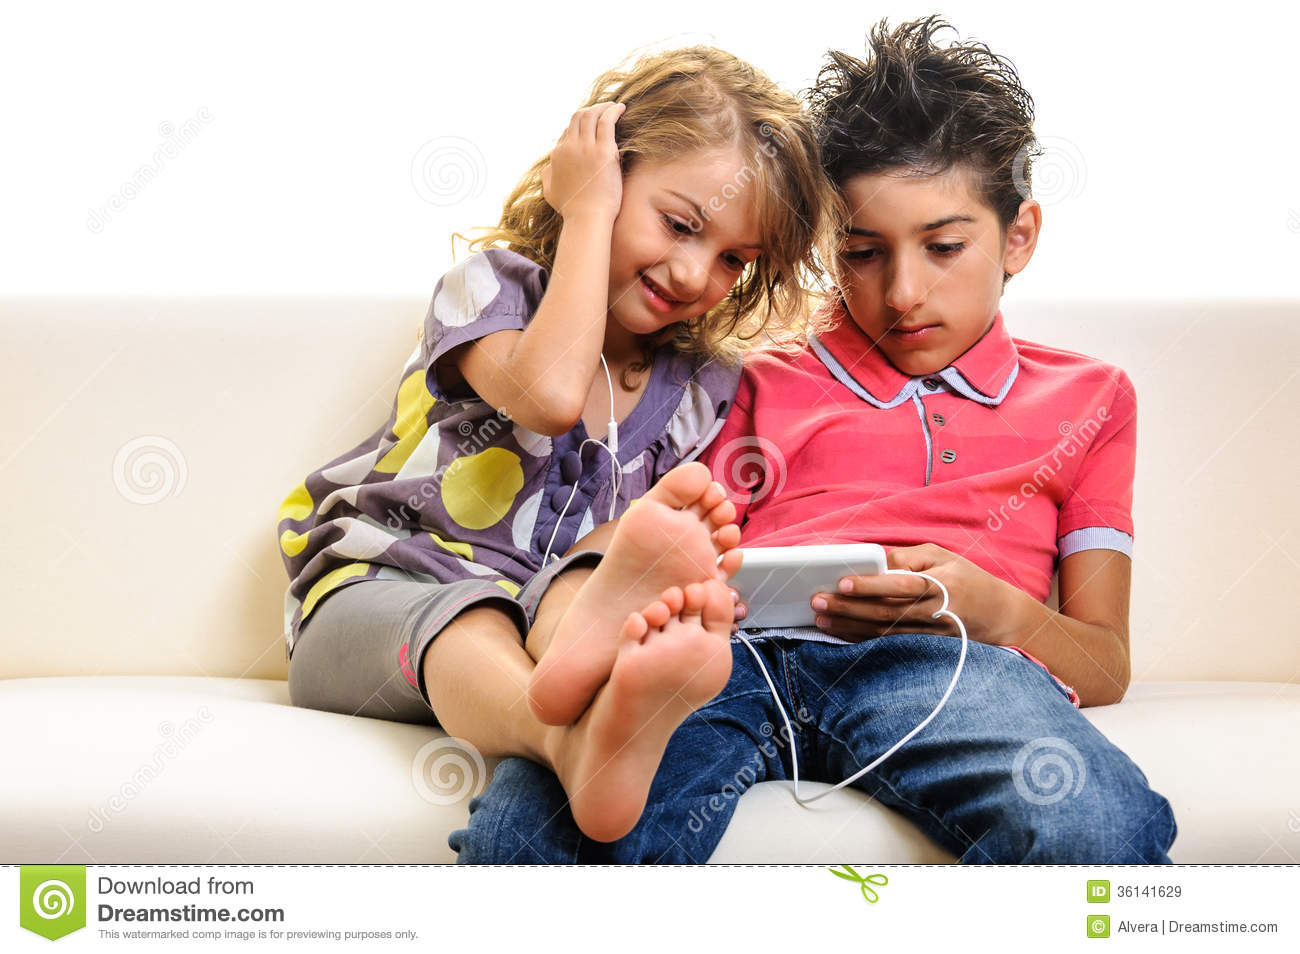 Children Playing Video Games On Cell Phone Royalty Free Stock Images